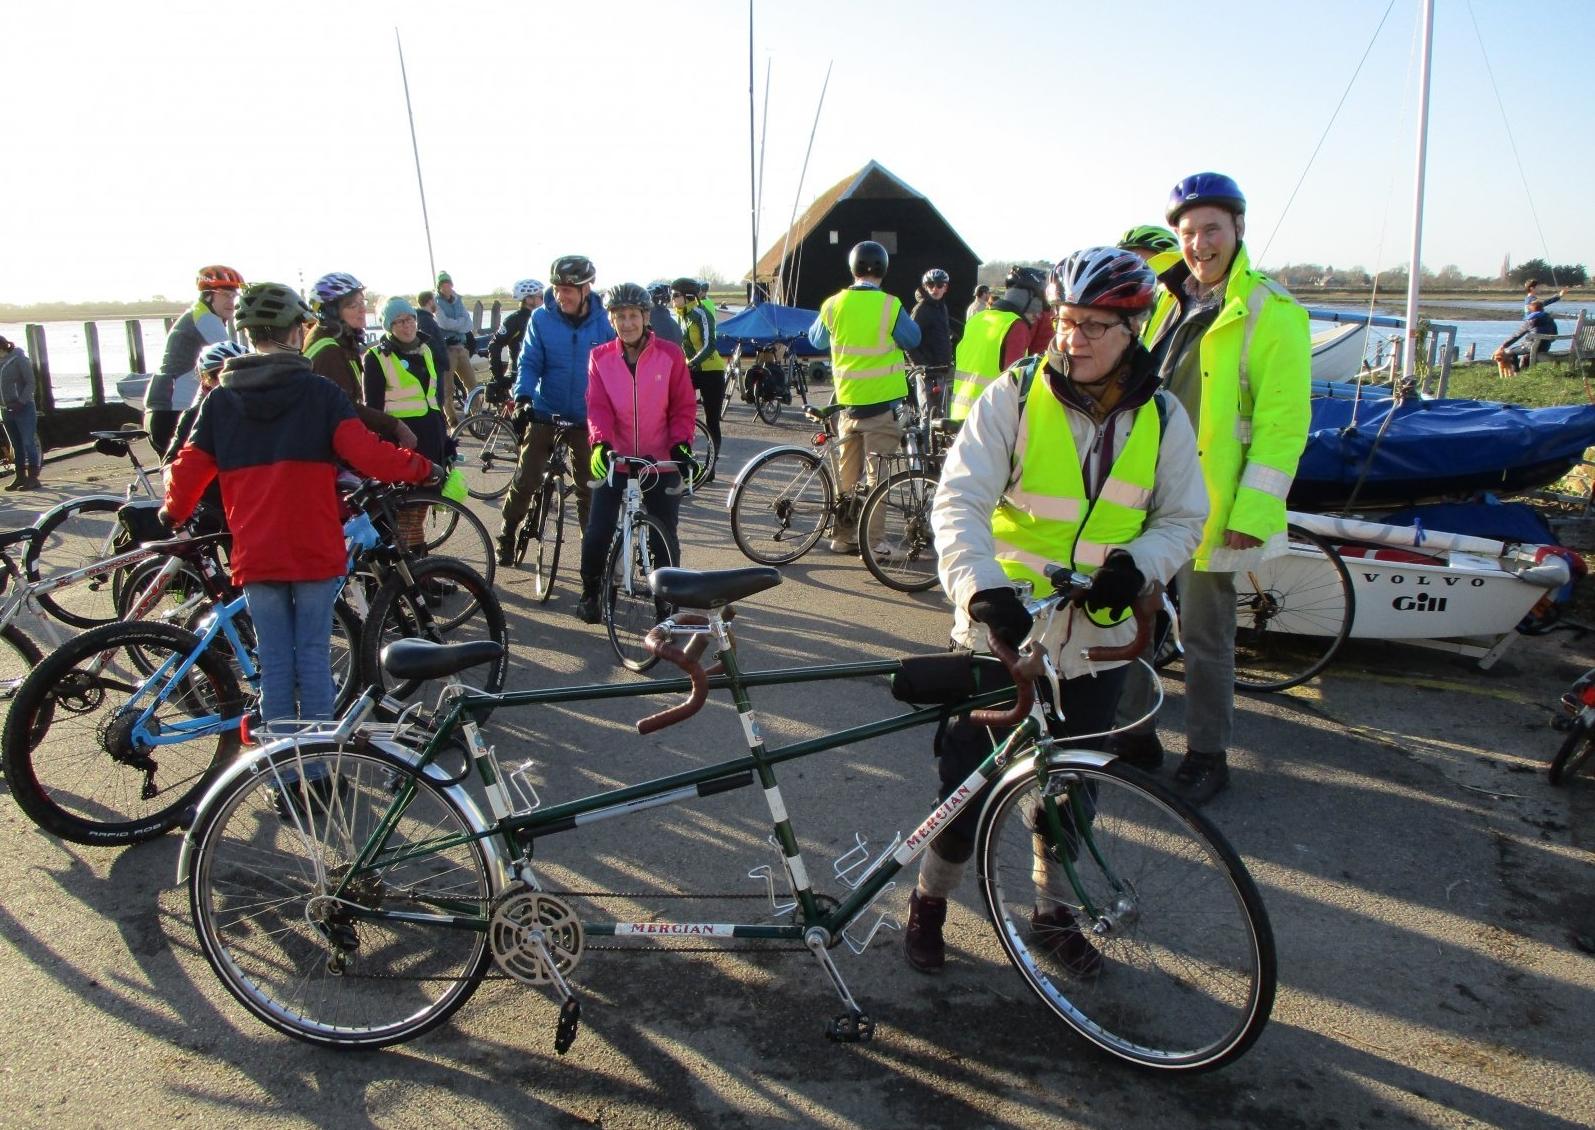 Following the death of well-known Bosham cyclist Gina McWilliam, a group of campaigners paid their respects and appealed for changes to the ‘inadequate’ road system at a well-attended event on Sunday. SUS-200122-104720001